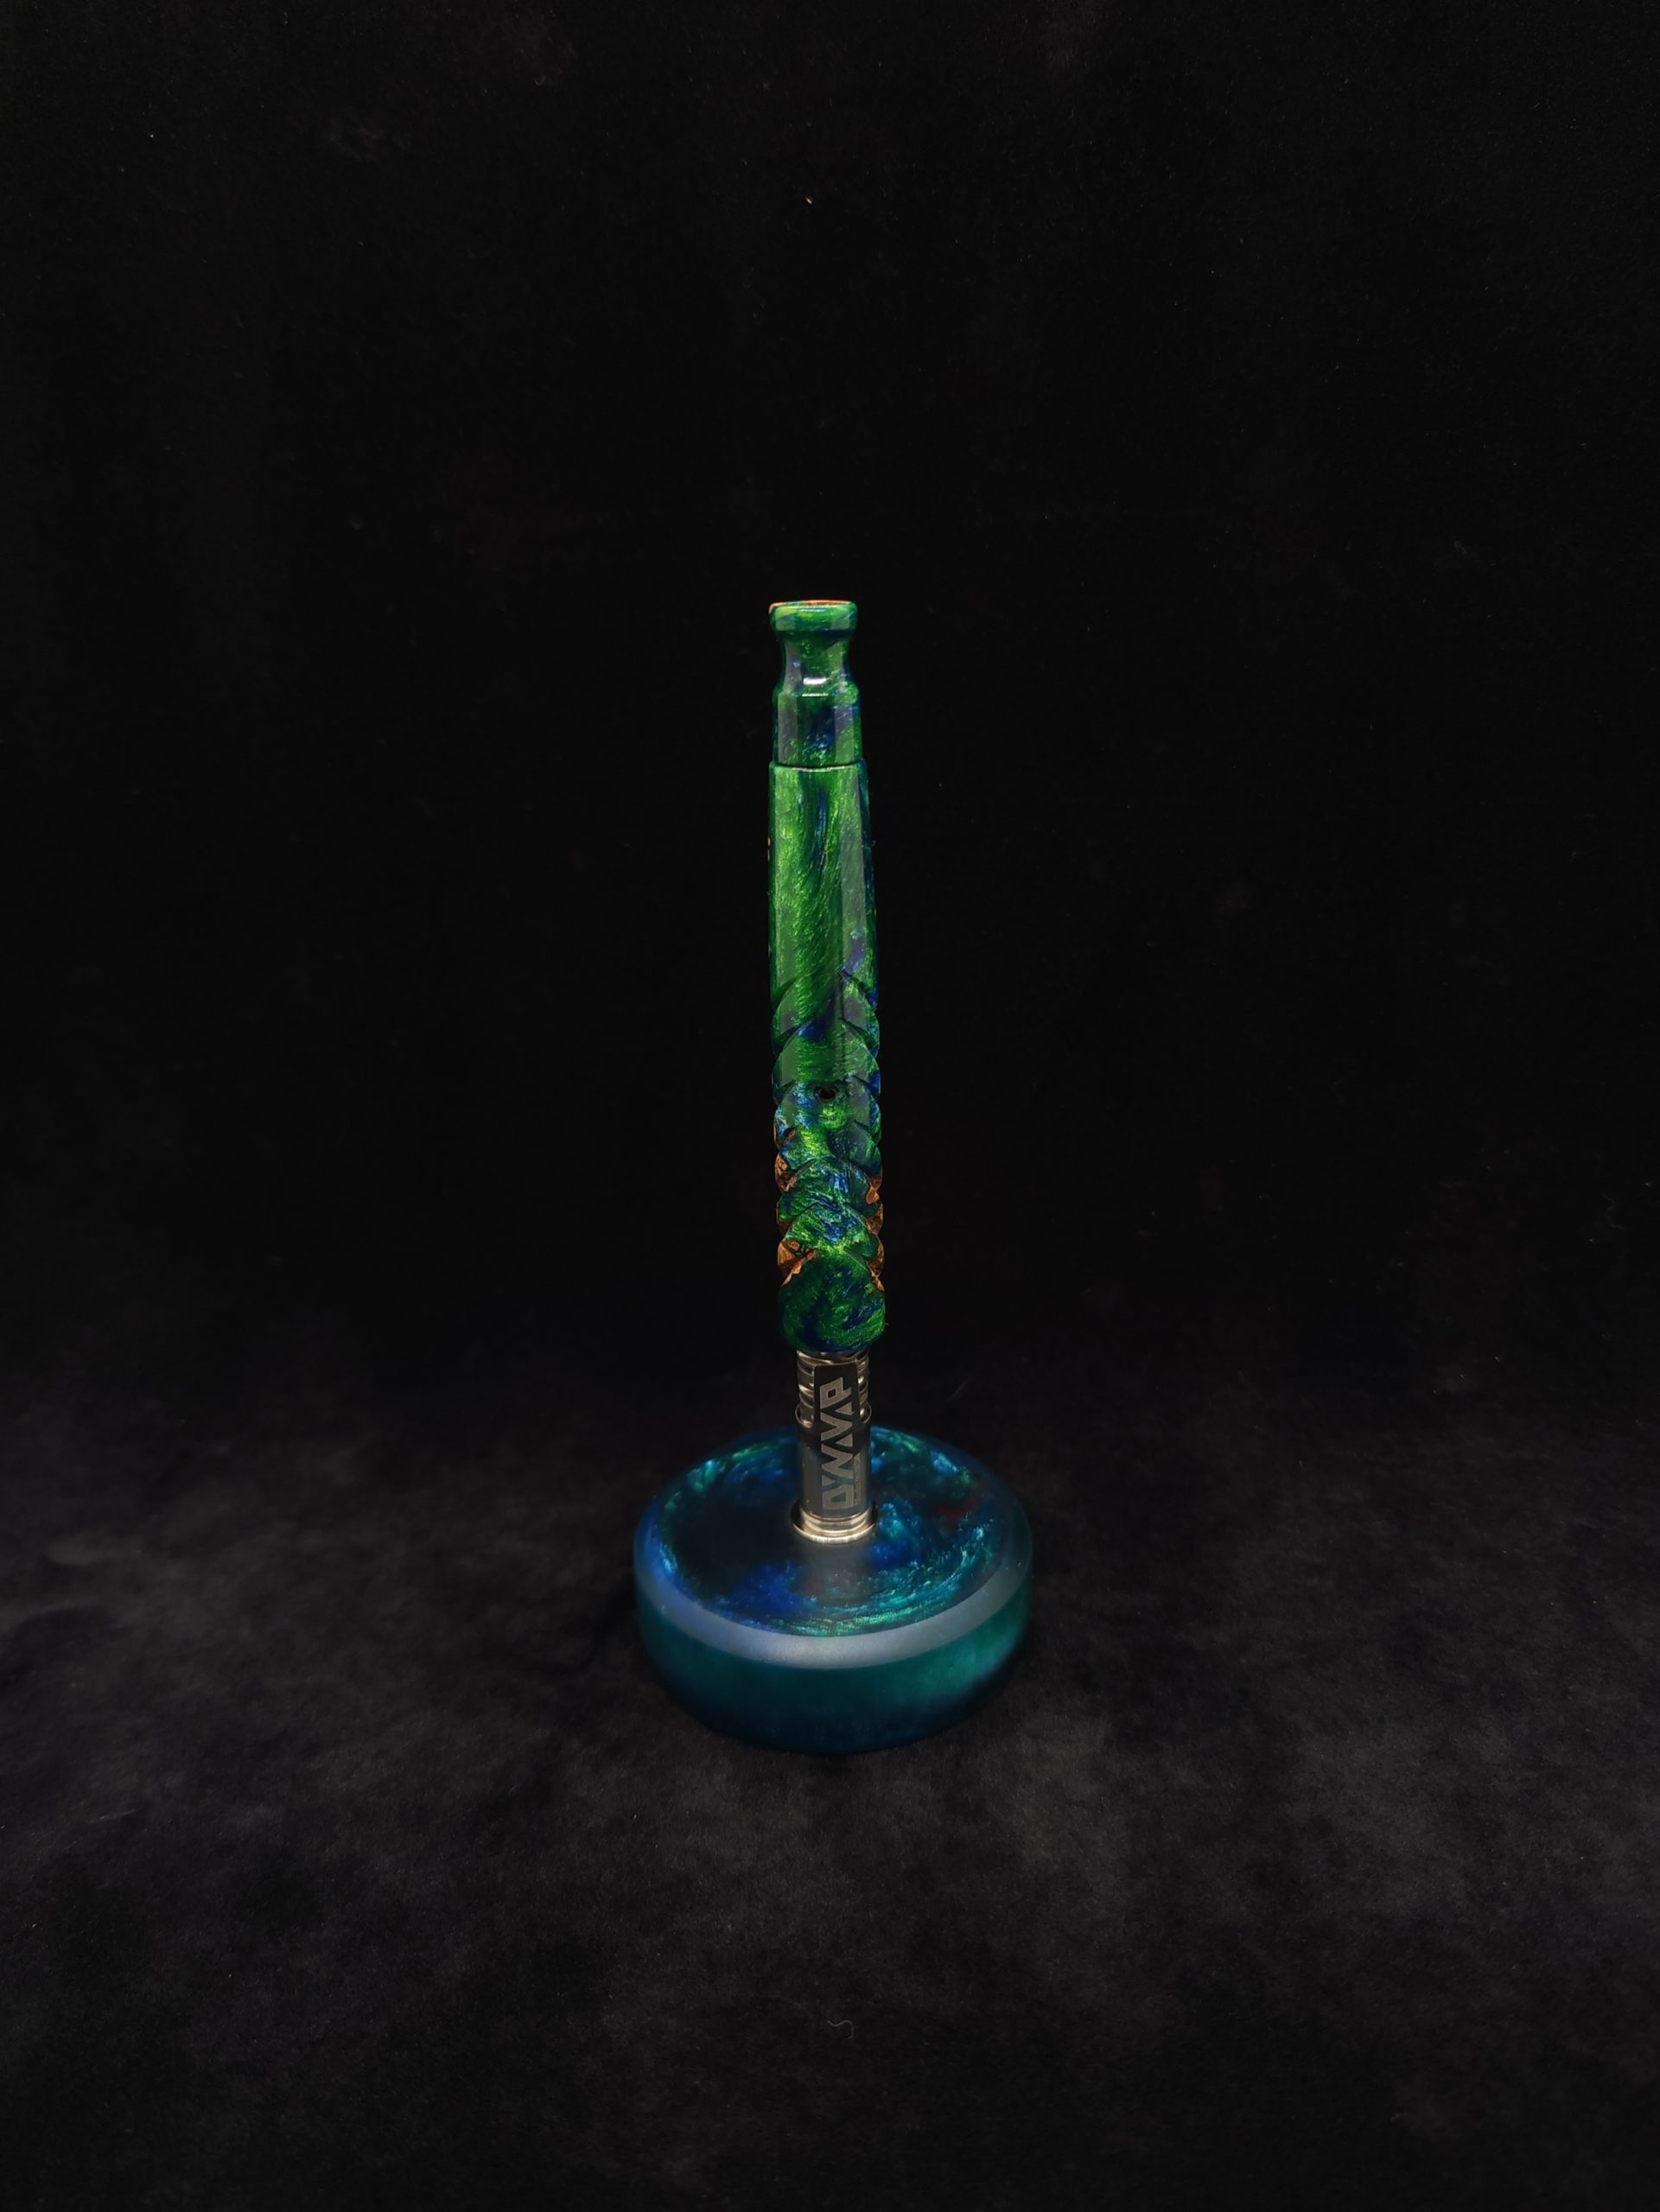 This image portrays Reaper XL Dynavap Stem/Burl Wood Hybrid+Matching Mouthpiece *4/20 SPECIAL* by Dovetail Woodwork.